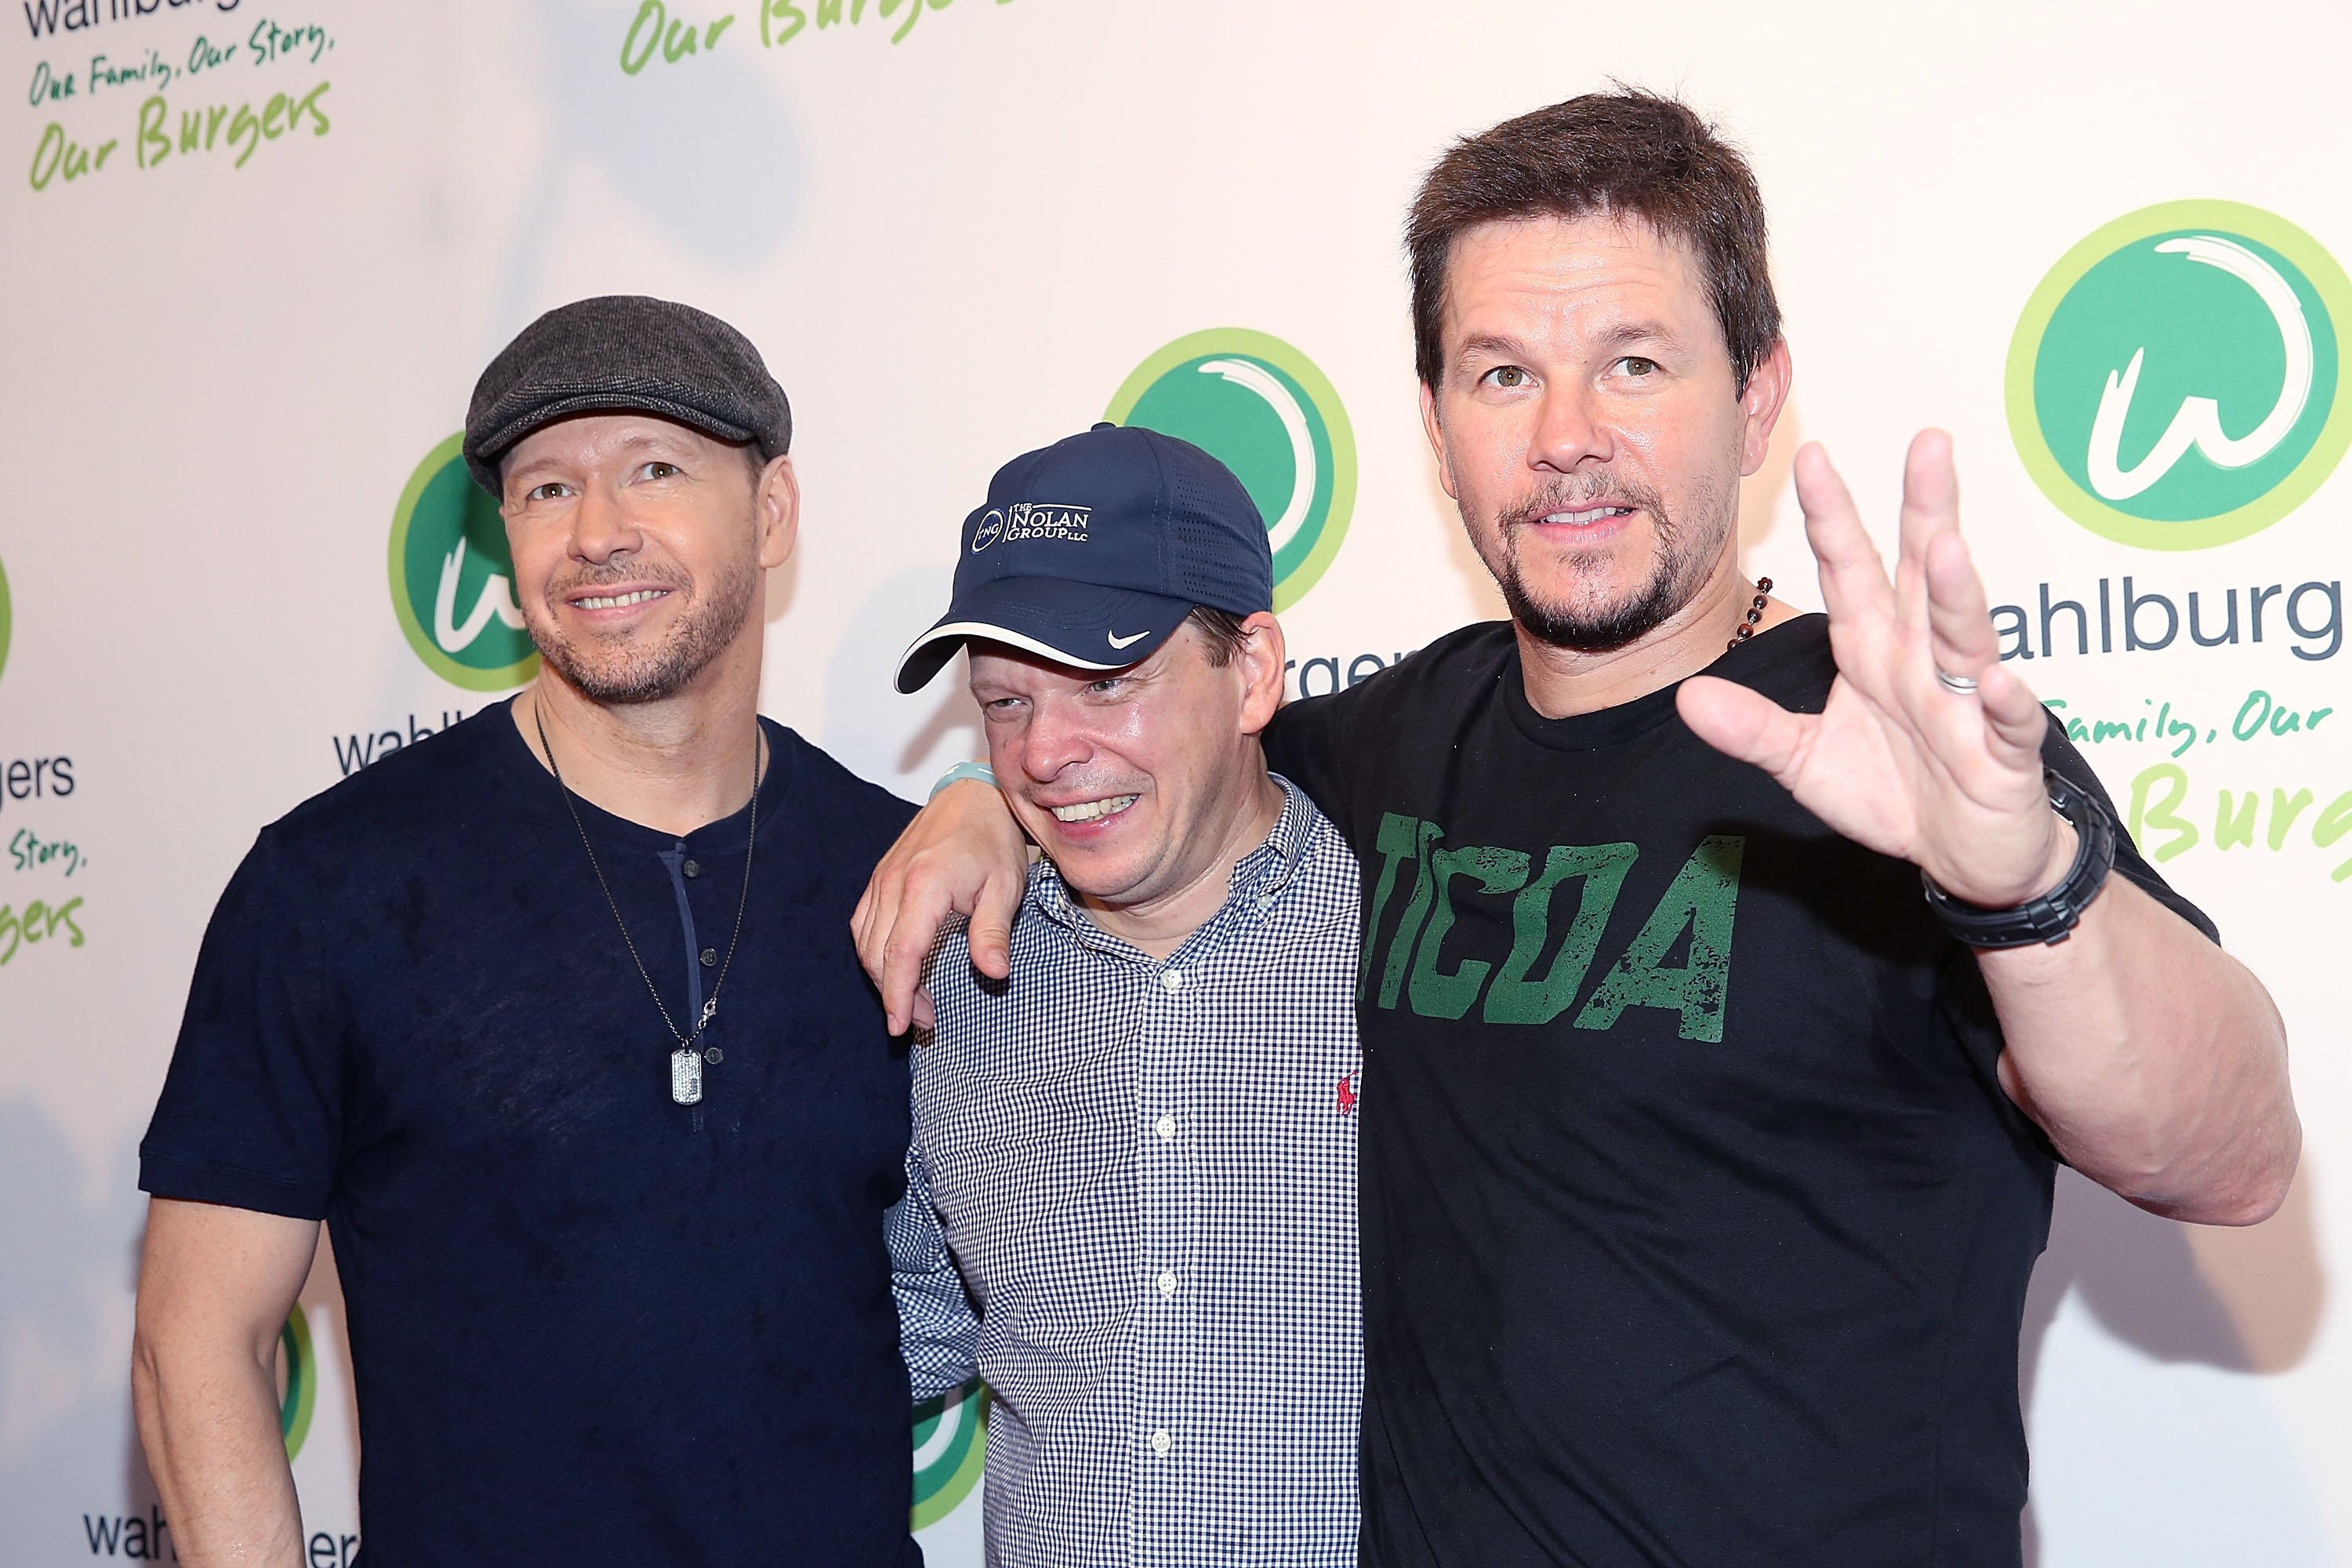 Donnie Wahlberg, Paul Wahlberg and Mark Wahlberg at the Wahlburgers Coney Island VIP Preview Party on June 23, 2015 in New York City.  |  Getty Images